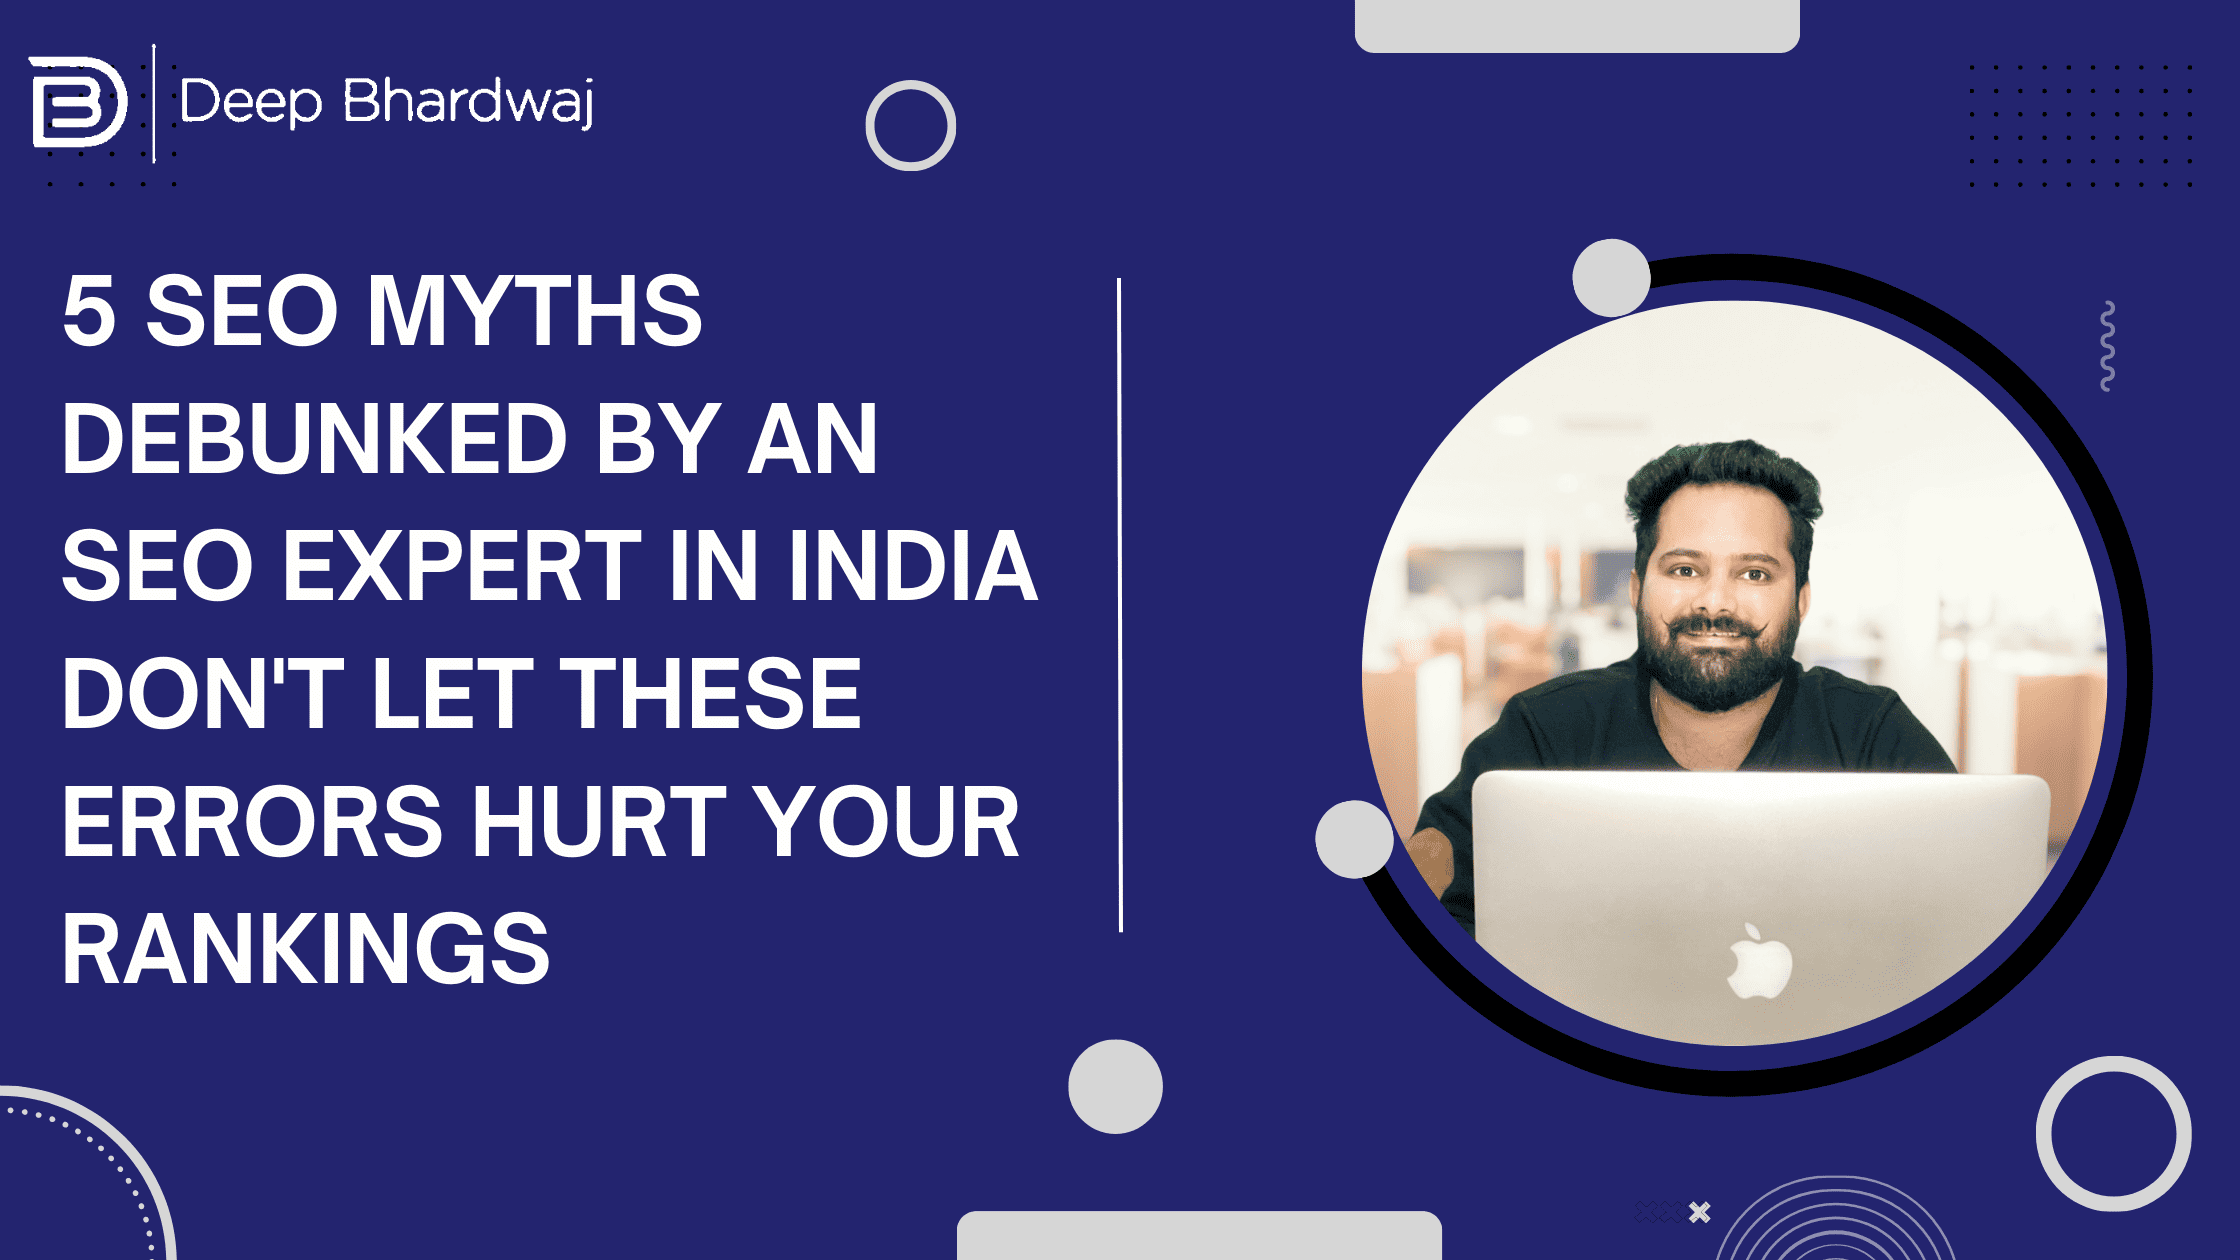 5 SEO Myths Debunked by an SEO expert in India Don't Let These Errors Hurt Your Rankings